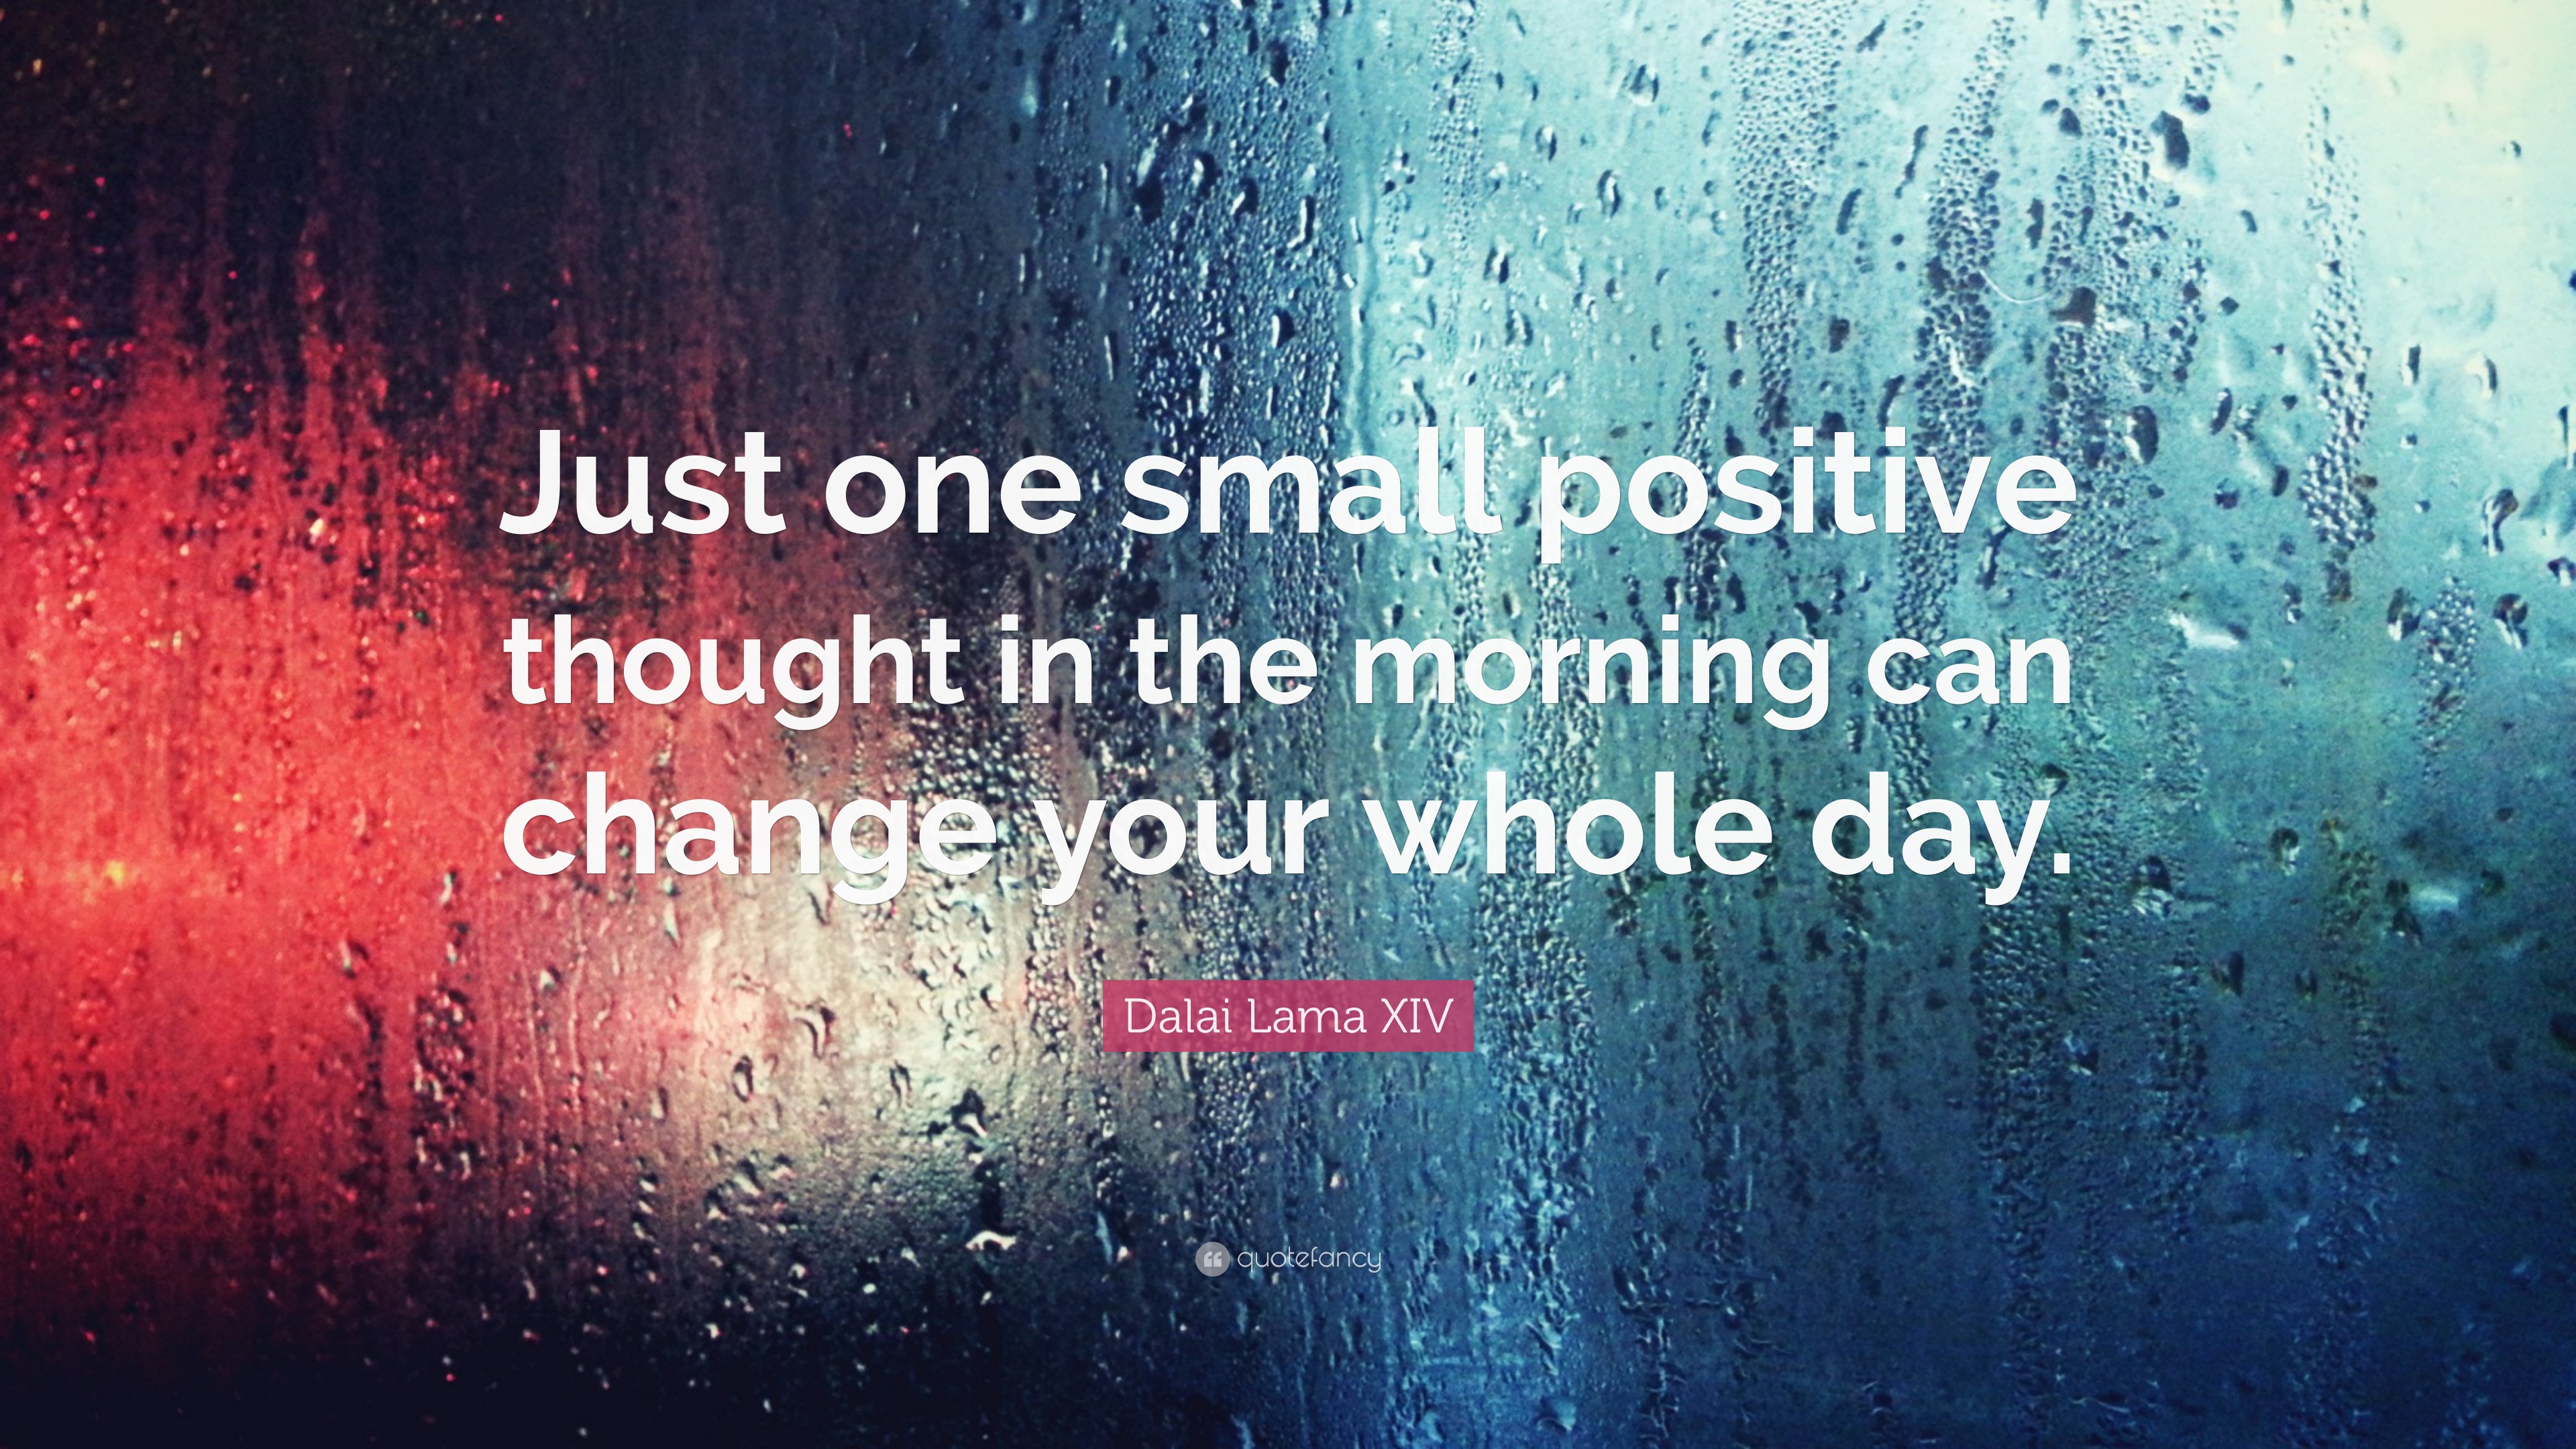 Dalai Lama XIV Quote: “Just one small positive thought in the morning can  change your whole